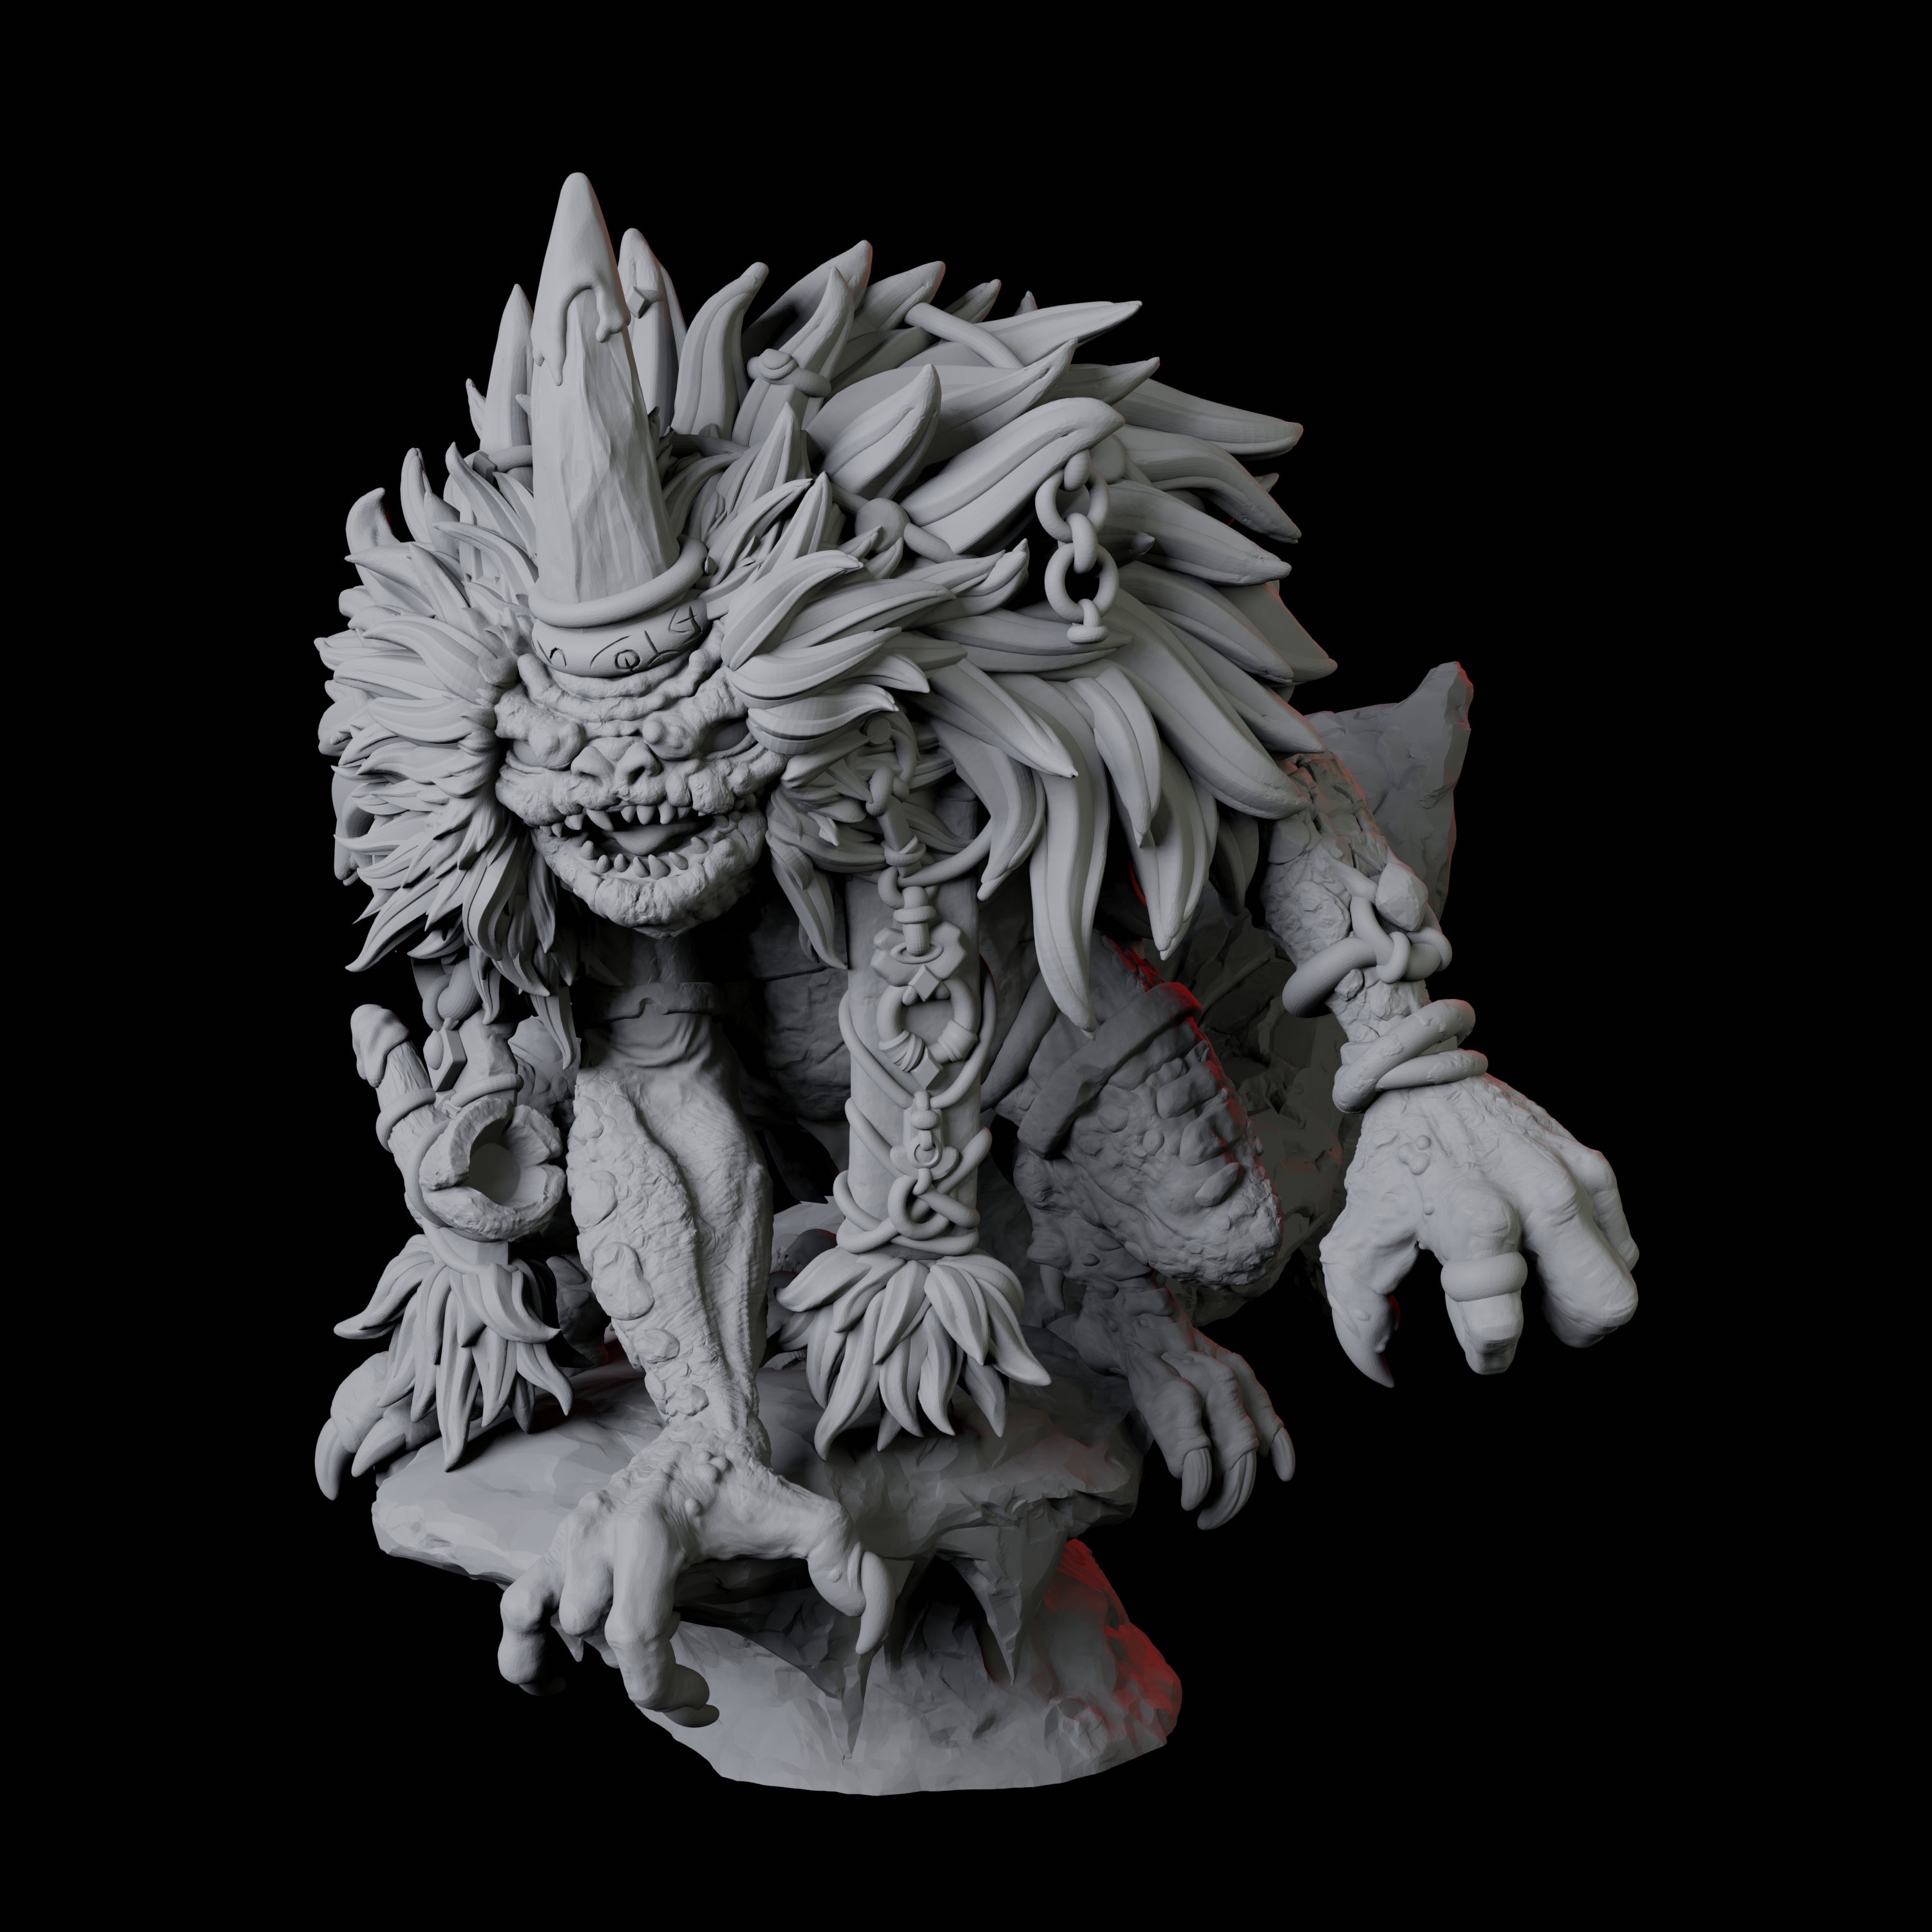 Mystic Boggard Swampseer Miniature for Dungeons and Dragons, Pathfinder or other TTRPGs